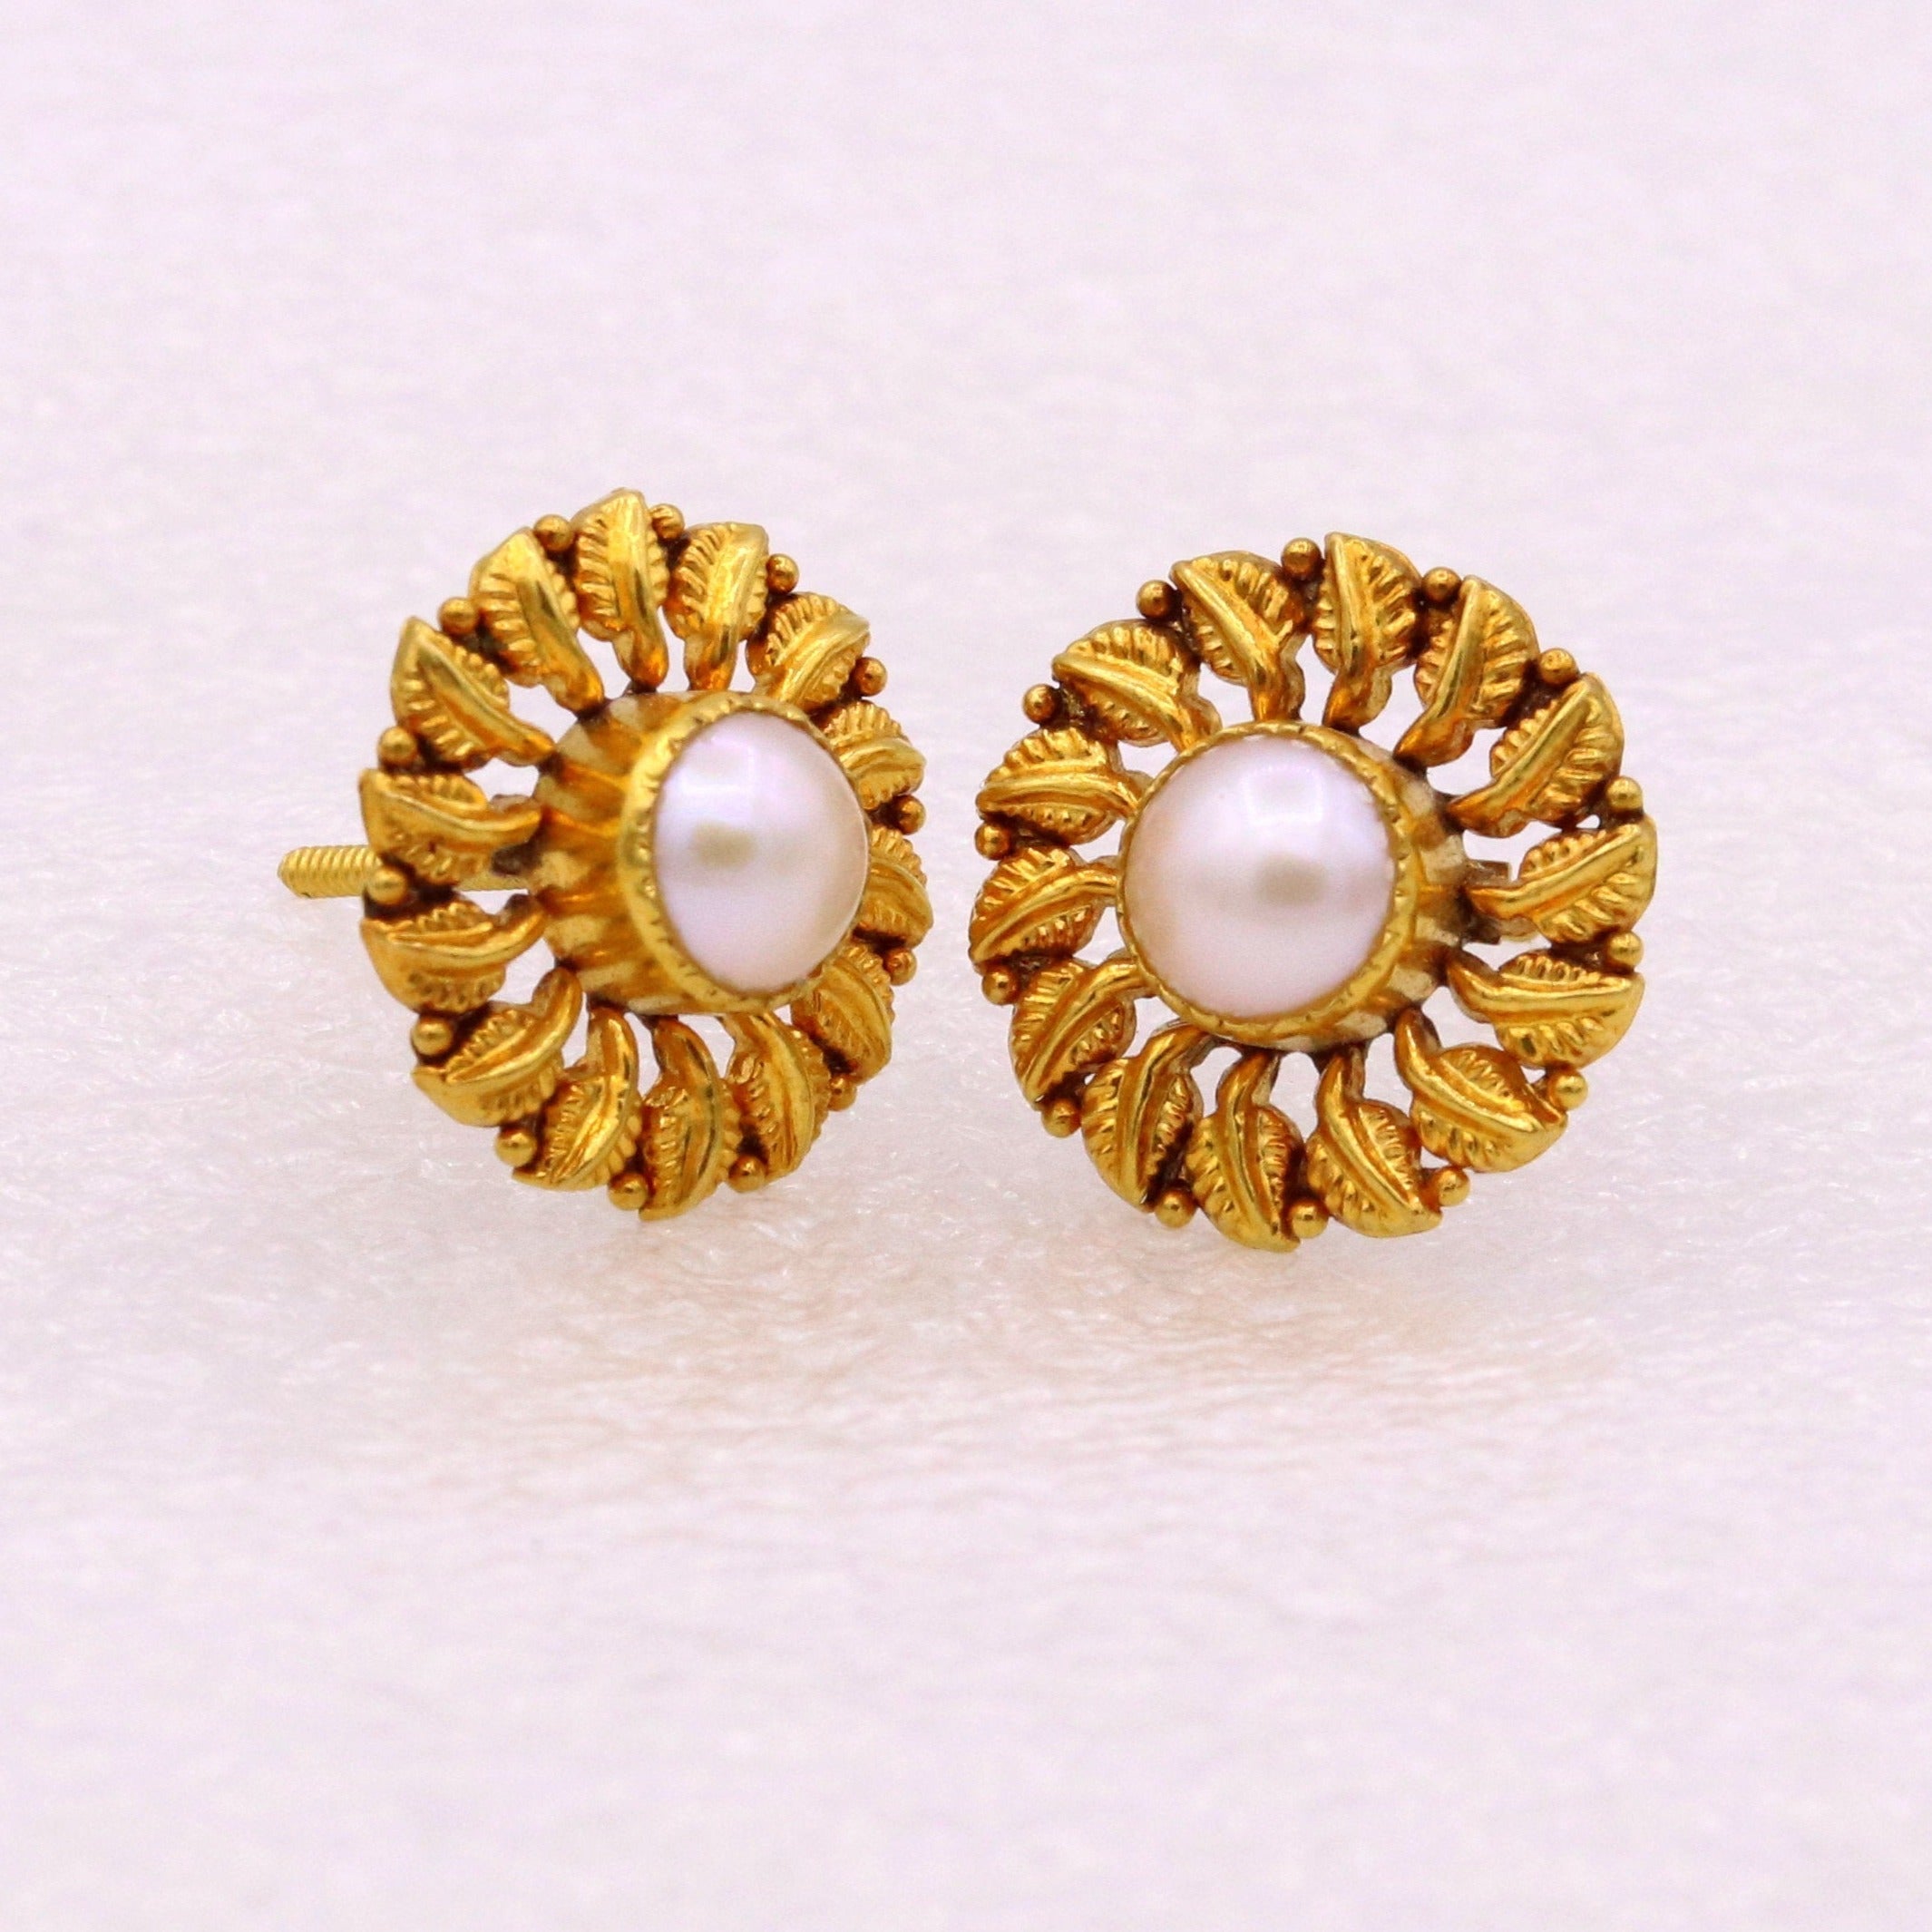 Pair Of Round Pearl Earrings On White Background Stock Photo  Download  Image Now  Earring Gold  Metal Gold Colored  iStock